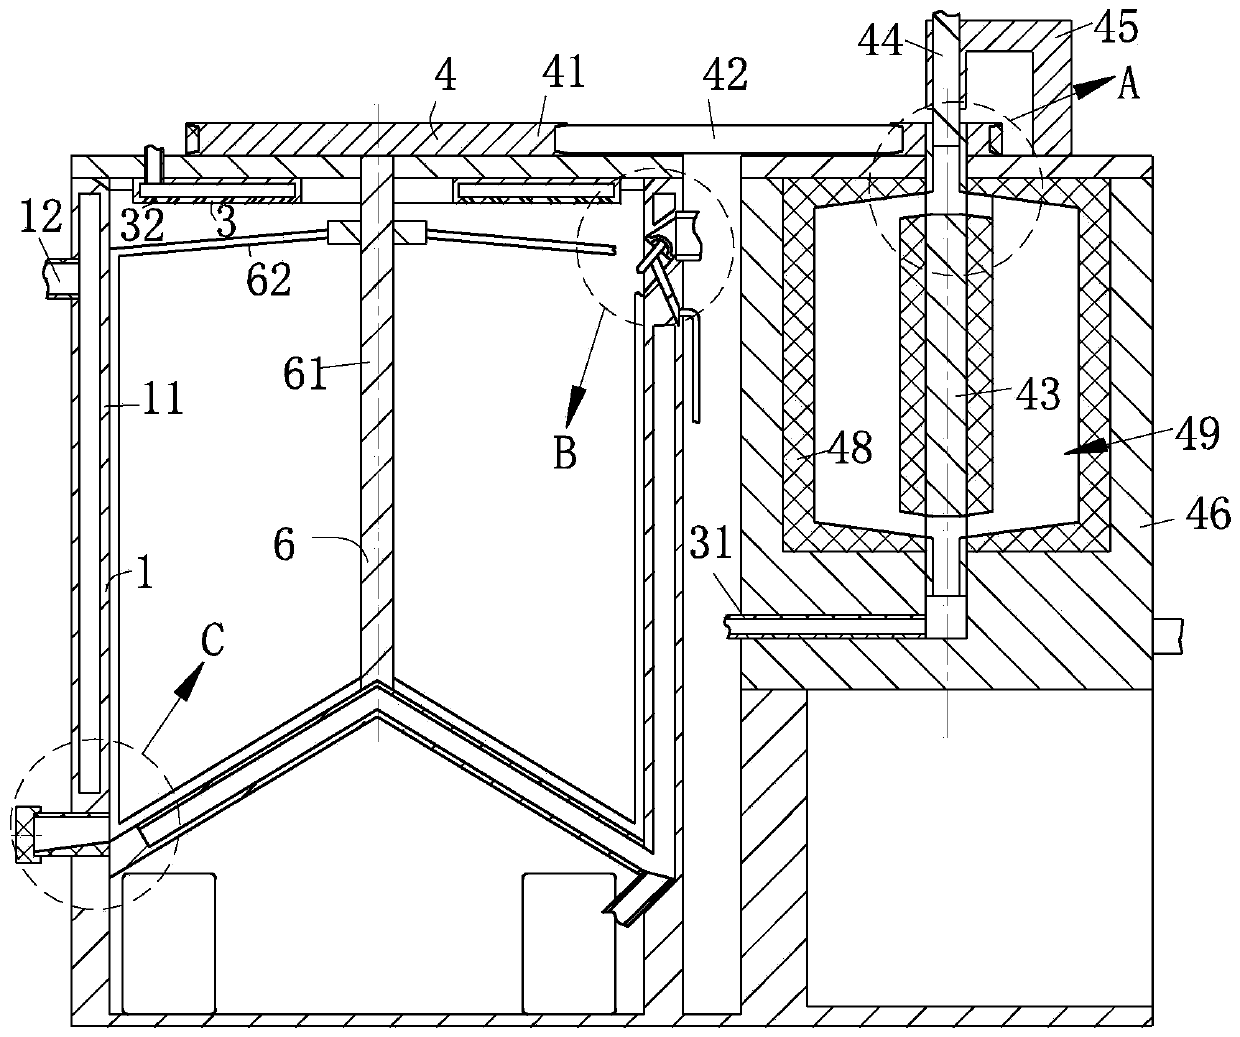 Heavy metal sewage treatment and reutilization device